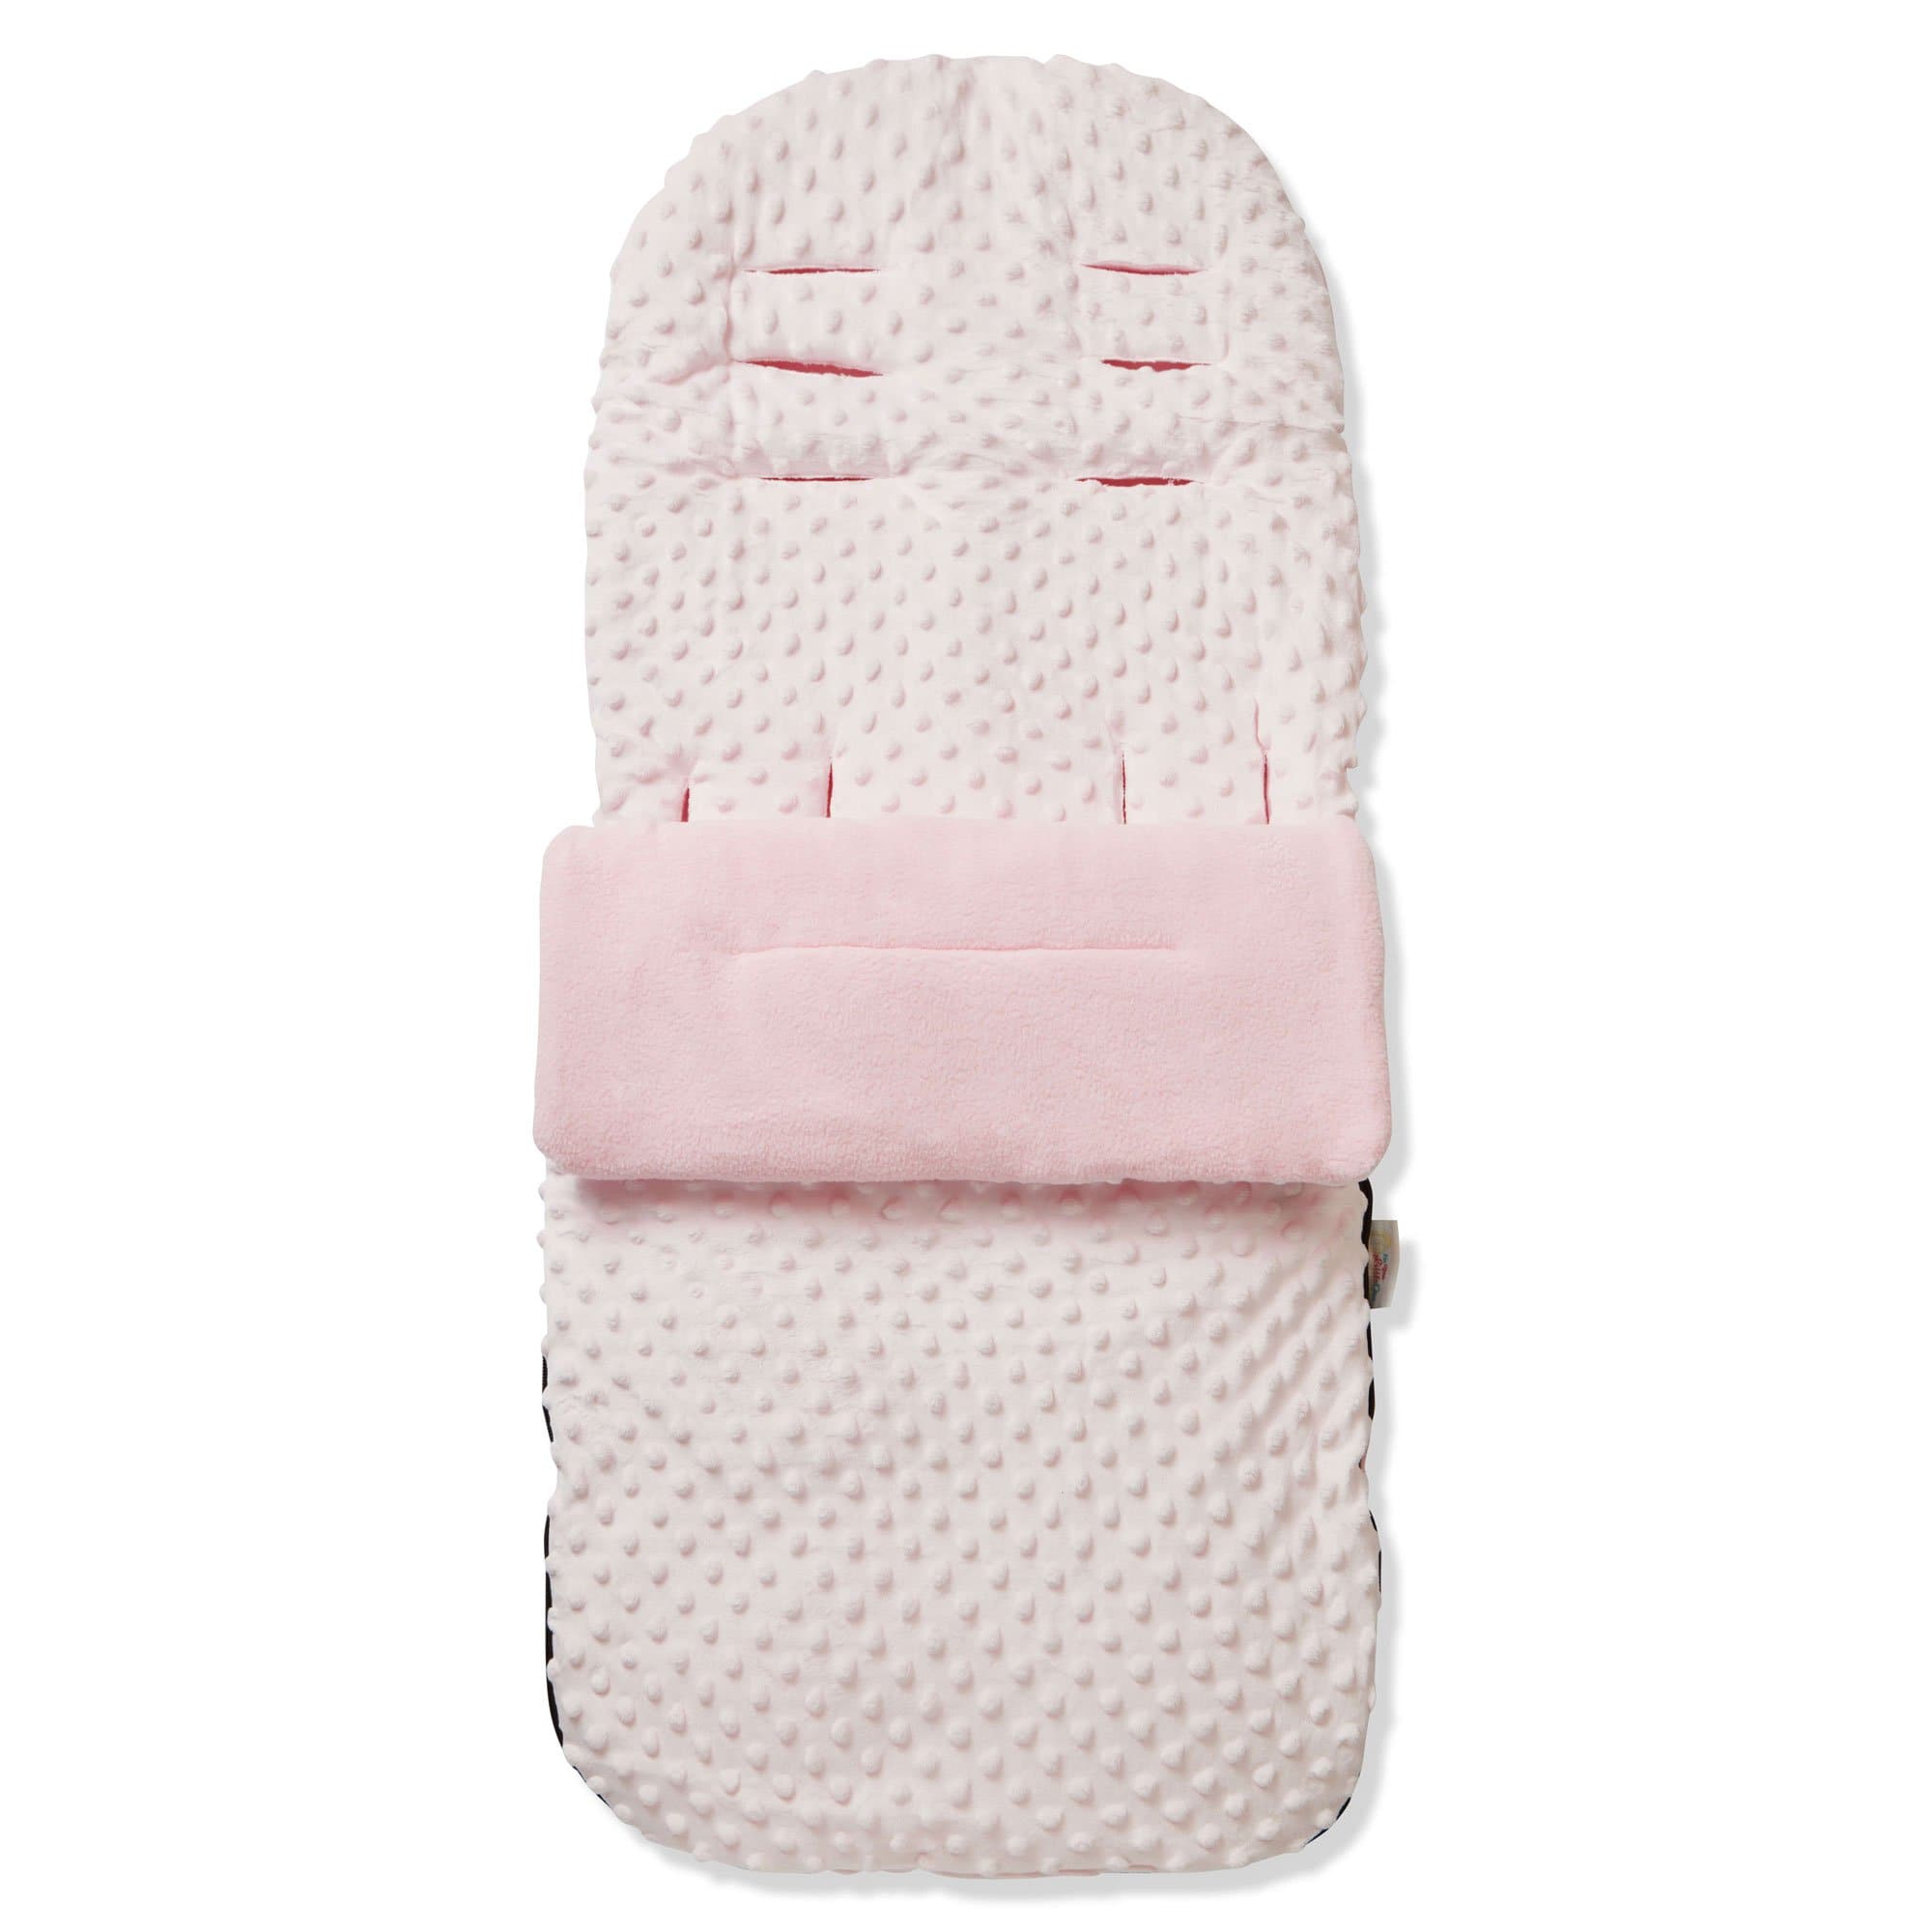 Dimple Footmuff / Cosy Toes Compatible with Babybus - Pink / Fits All Models | For Your Little One